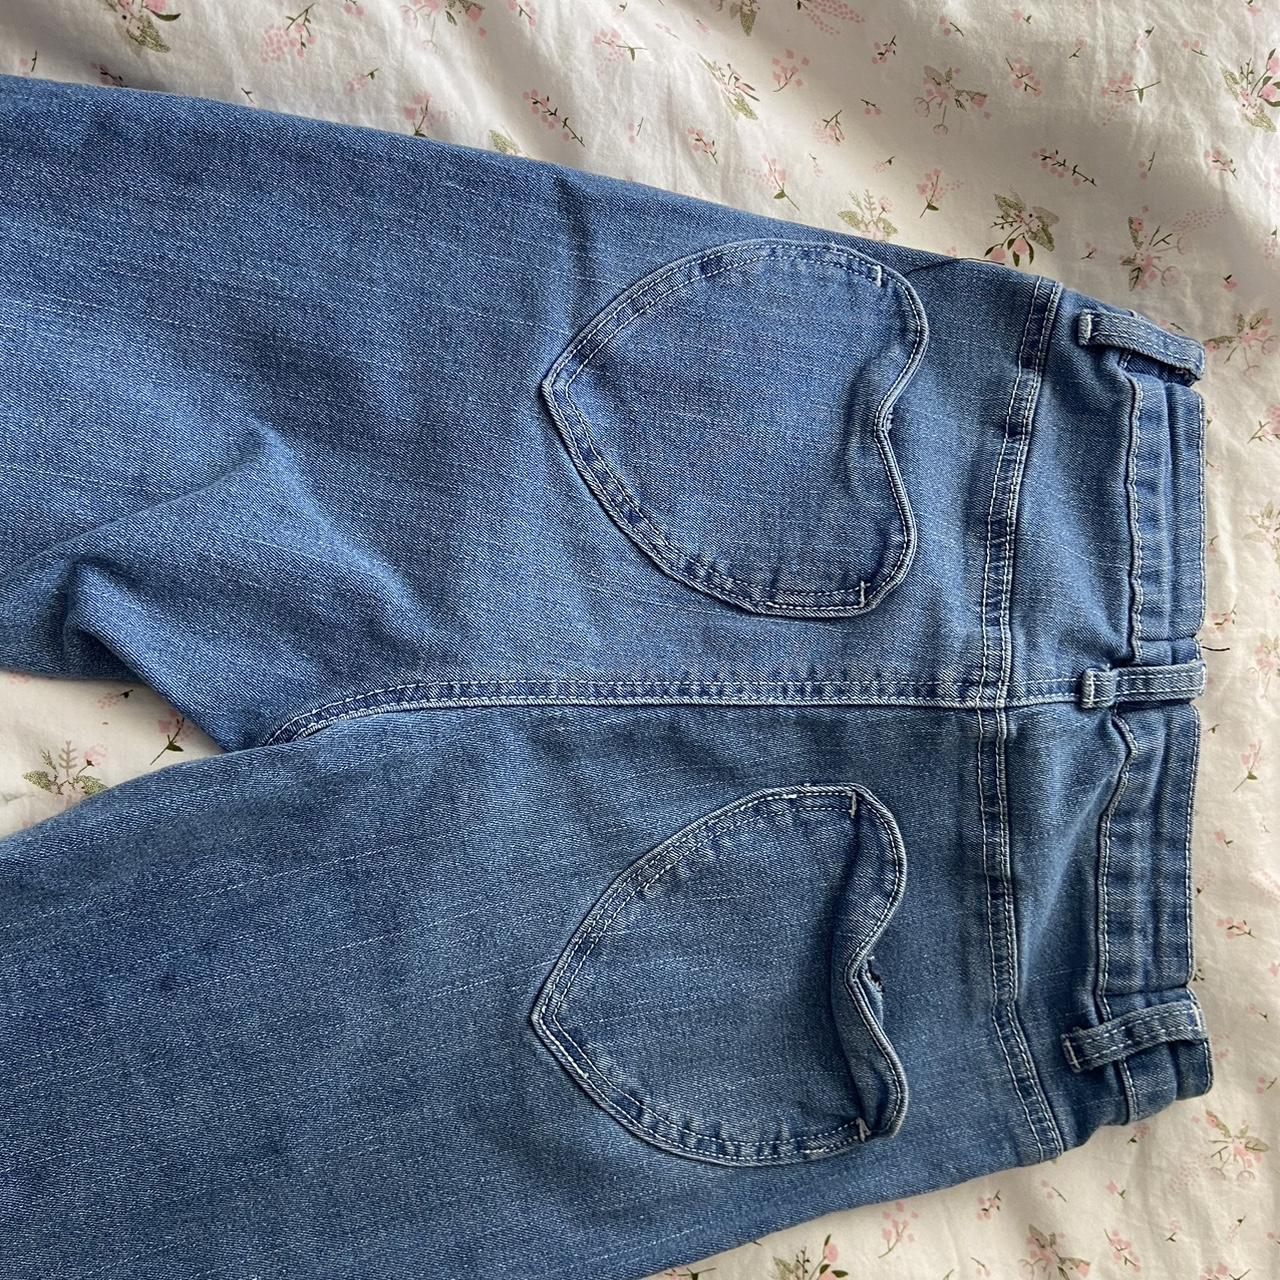 High rise flare jeans with heart shaped pockets - Depop